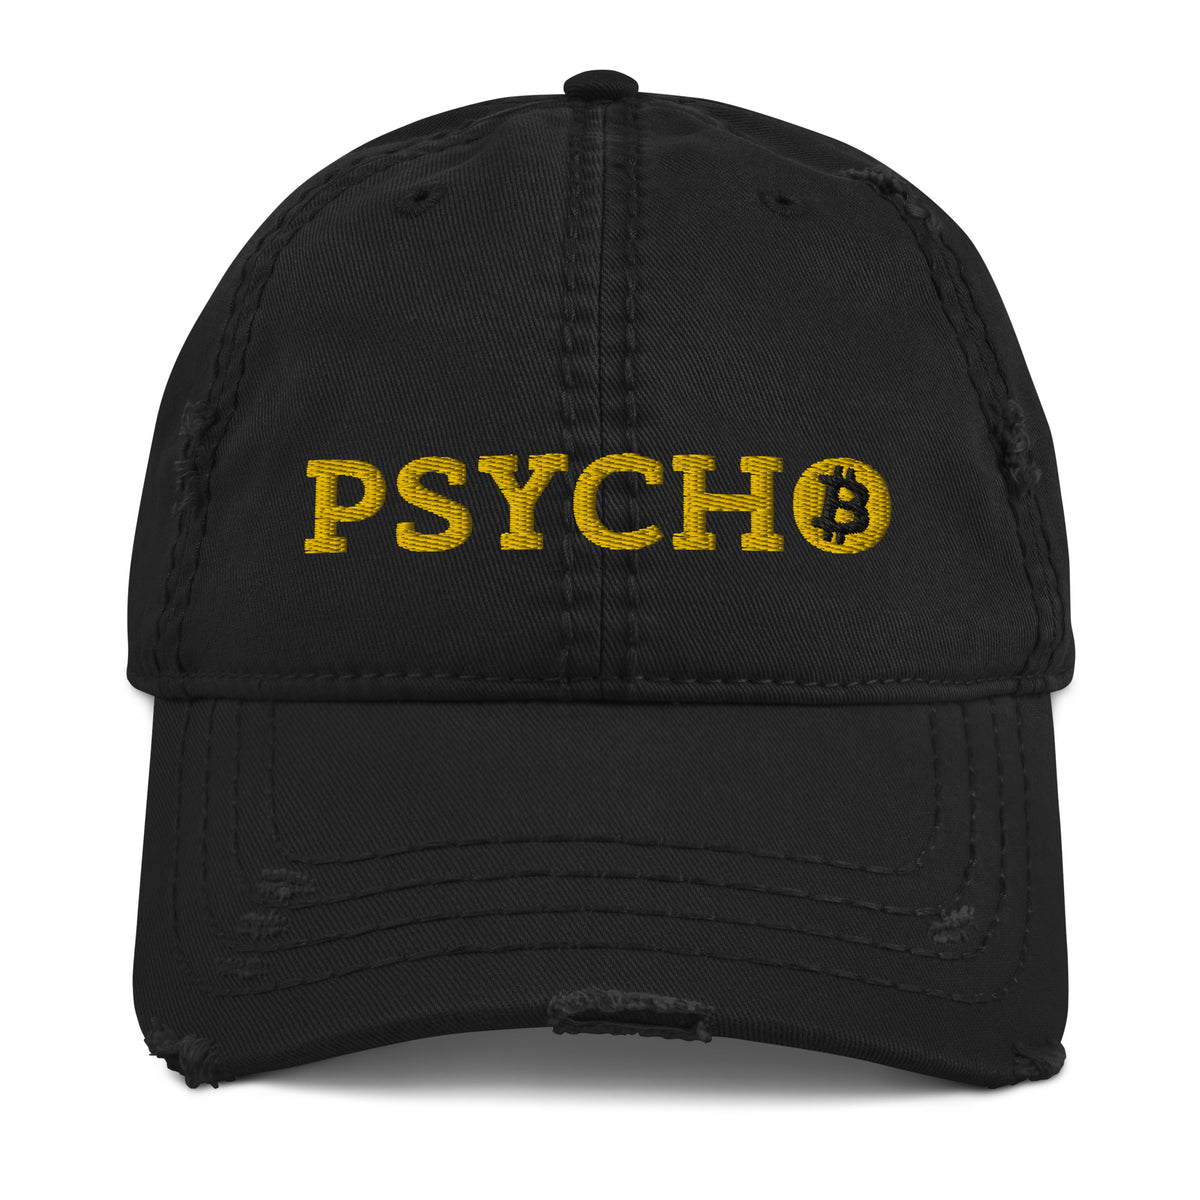 Psycho (Gold Lettering) Bitcoin Distressed Dad Hat - fomo21